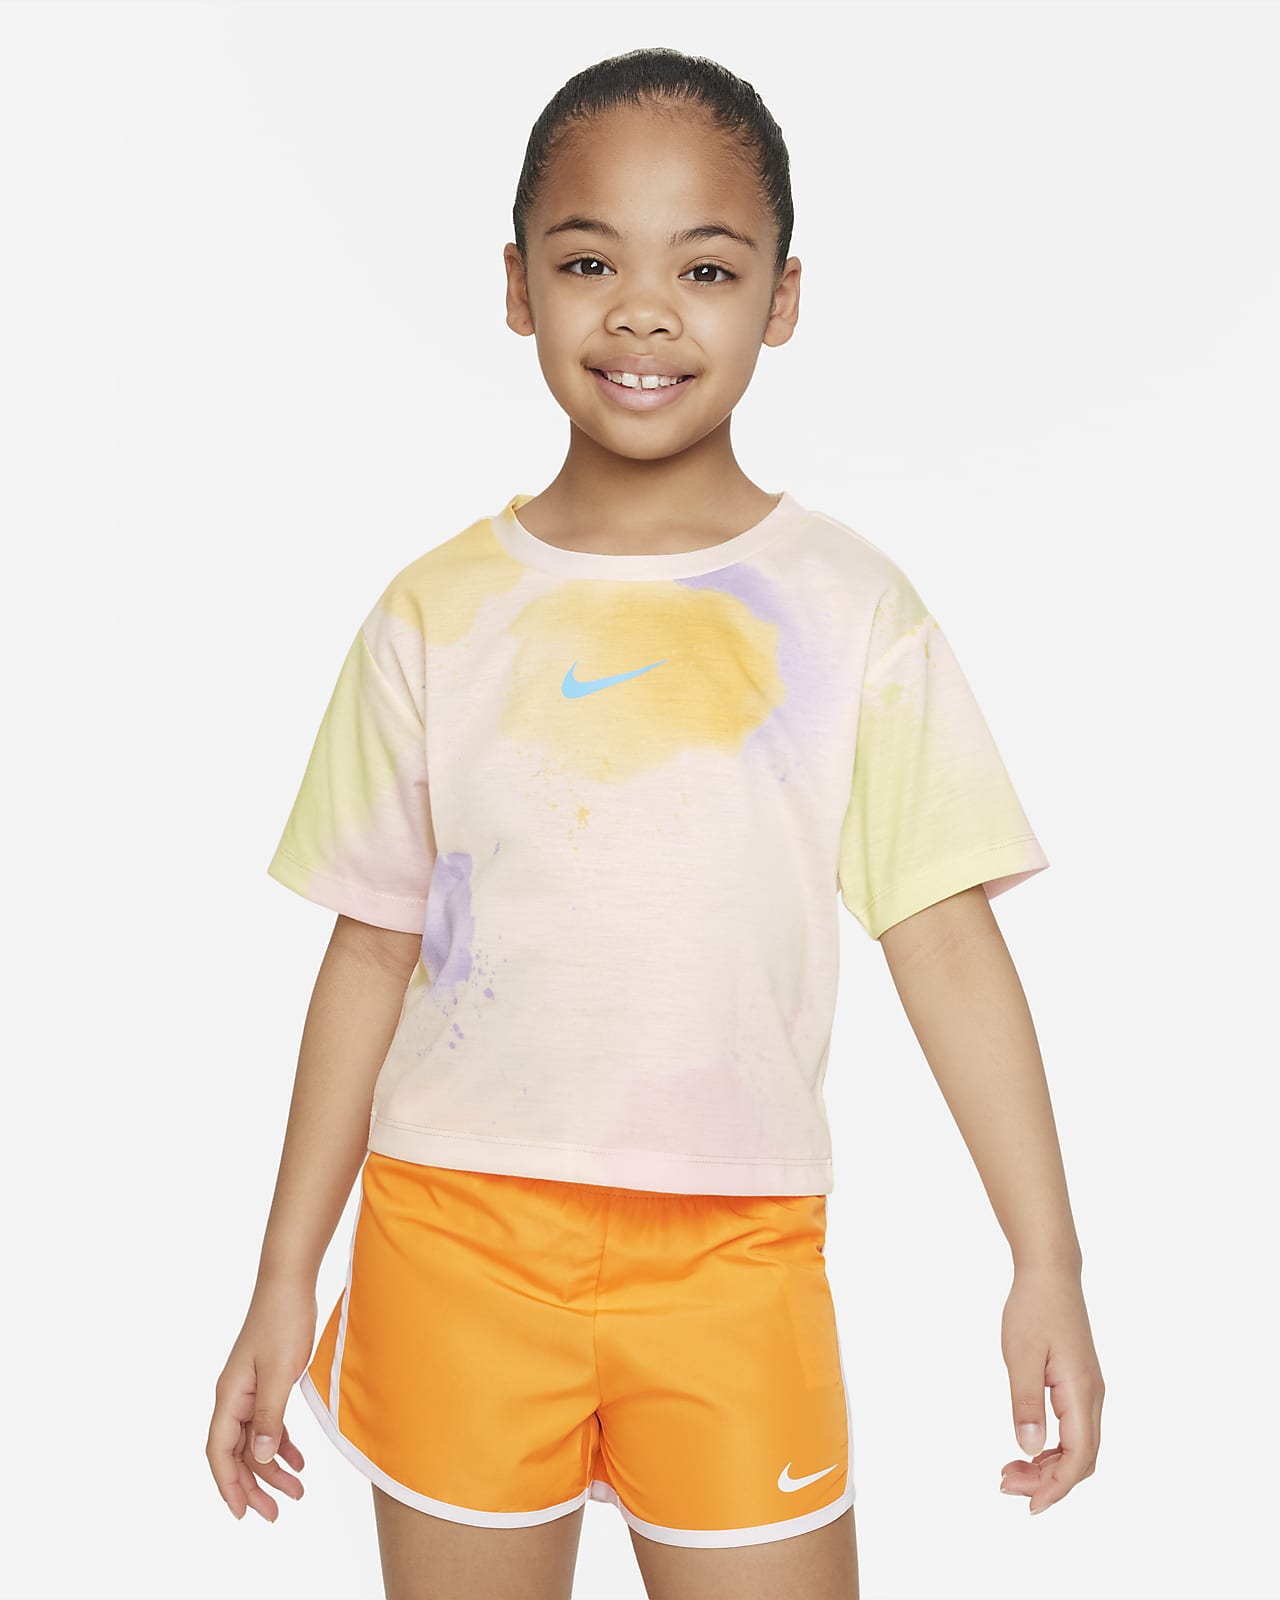 Nike "Just DIY It" Boxy Tee Younger Kids' T-shirt